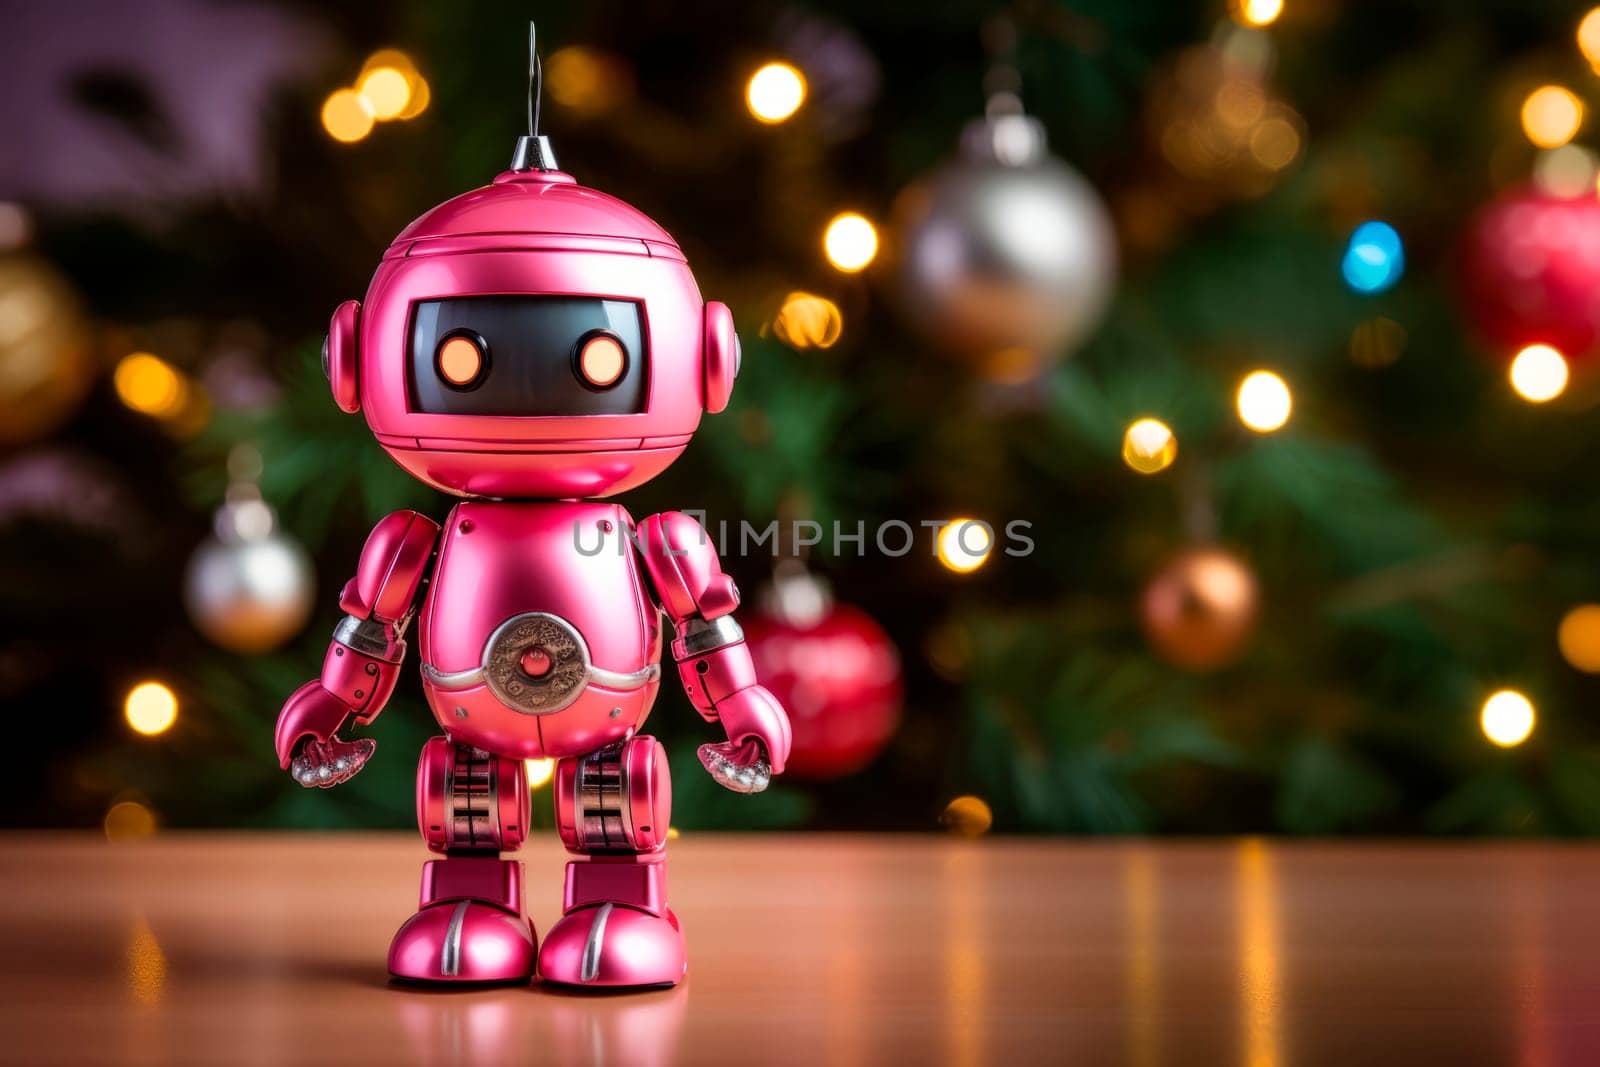 a New Year's toy in the form of a robot on a Christmas background. Copy space. High quality photo